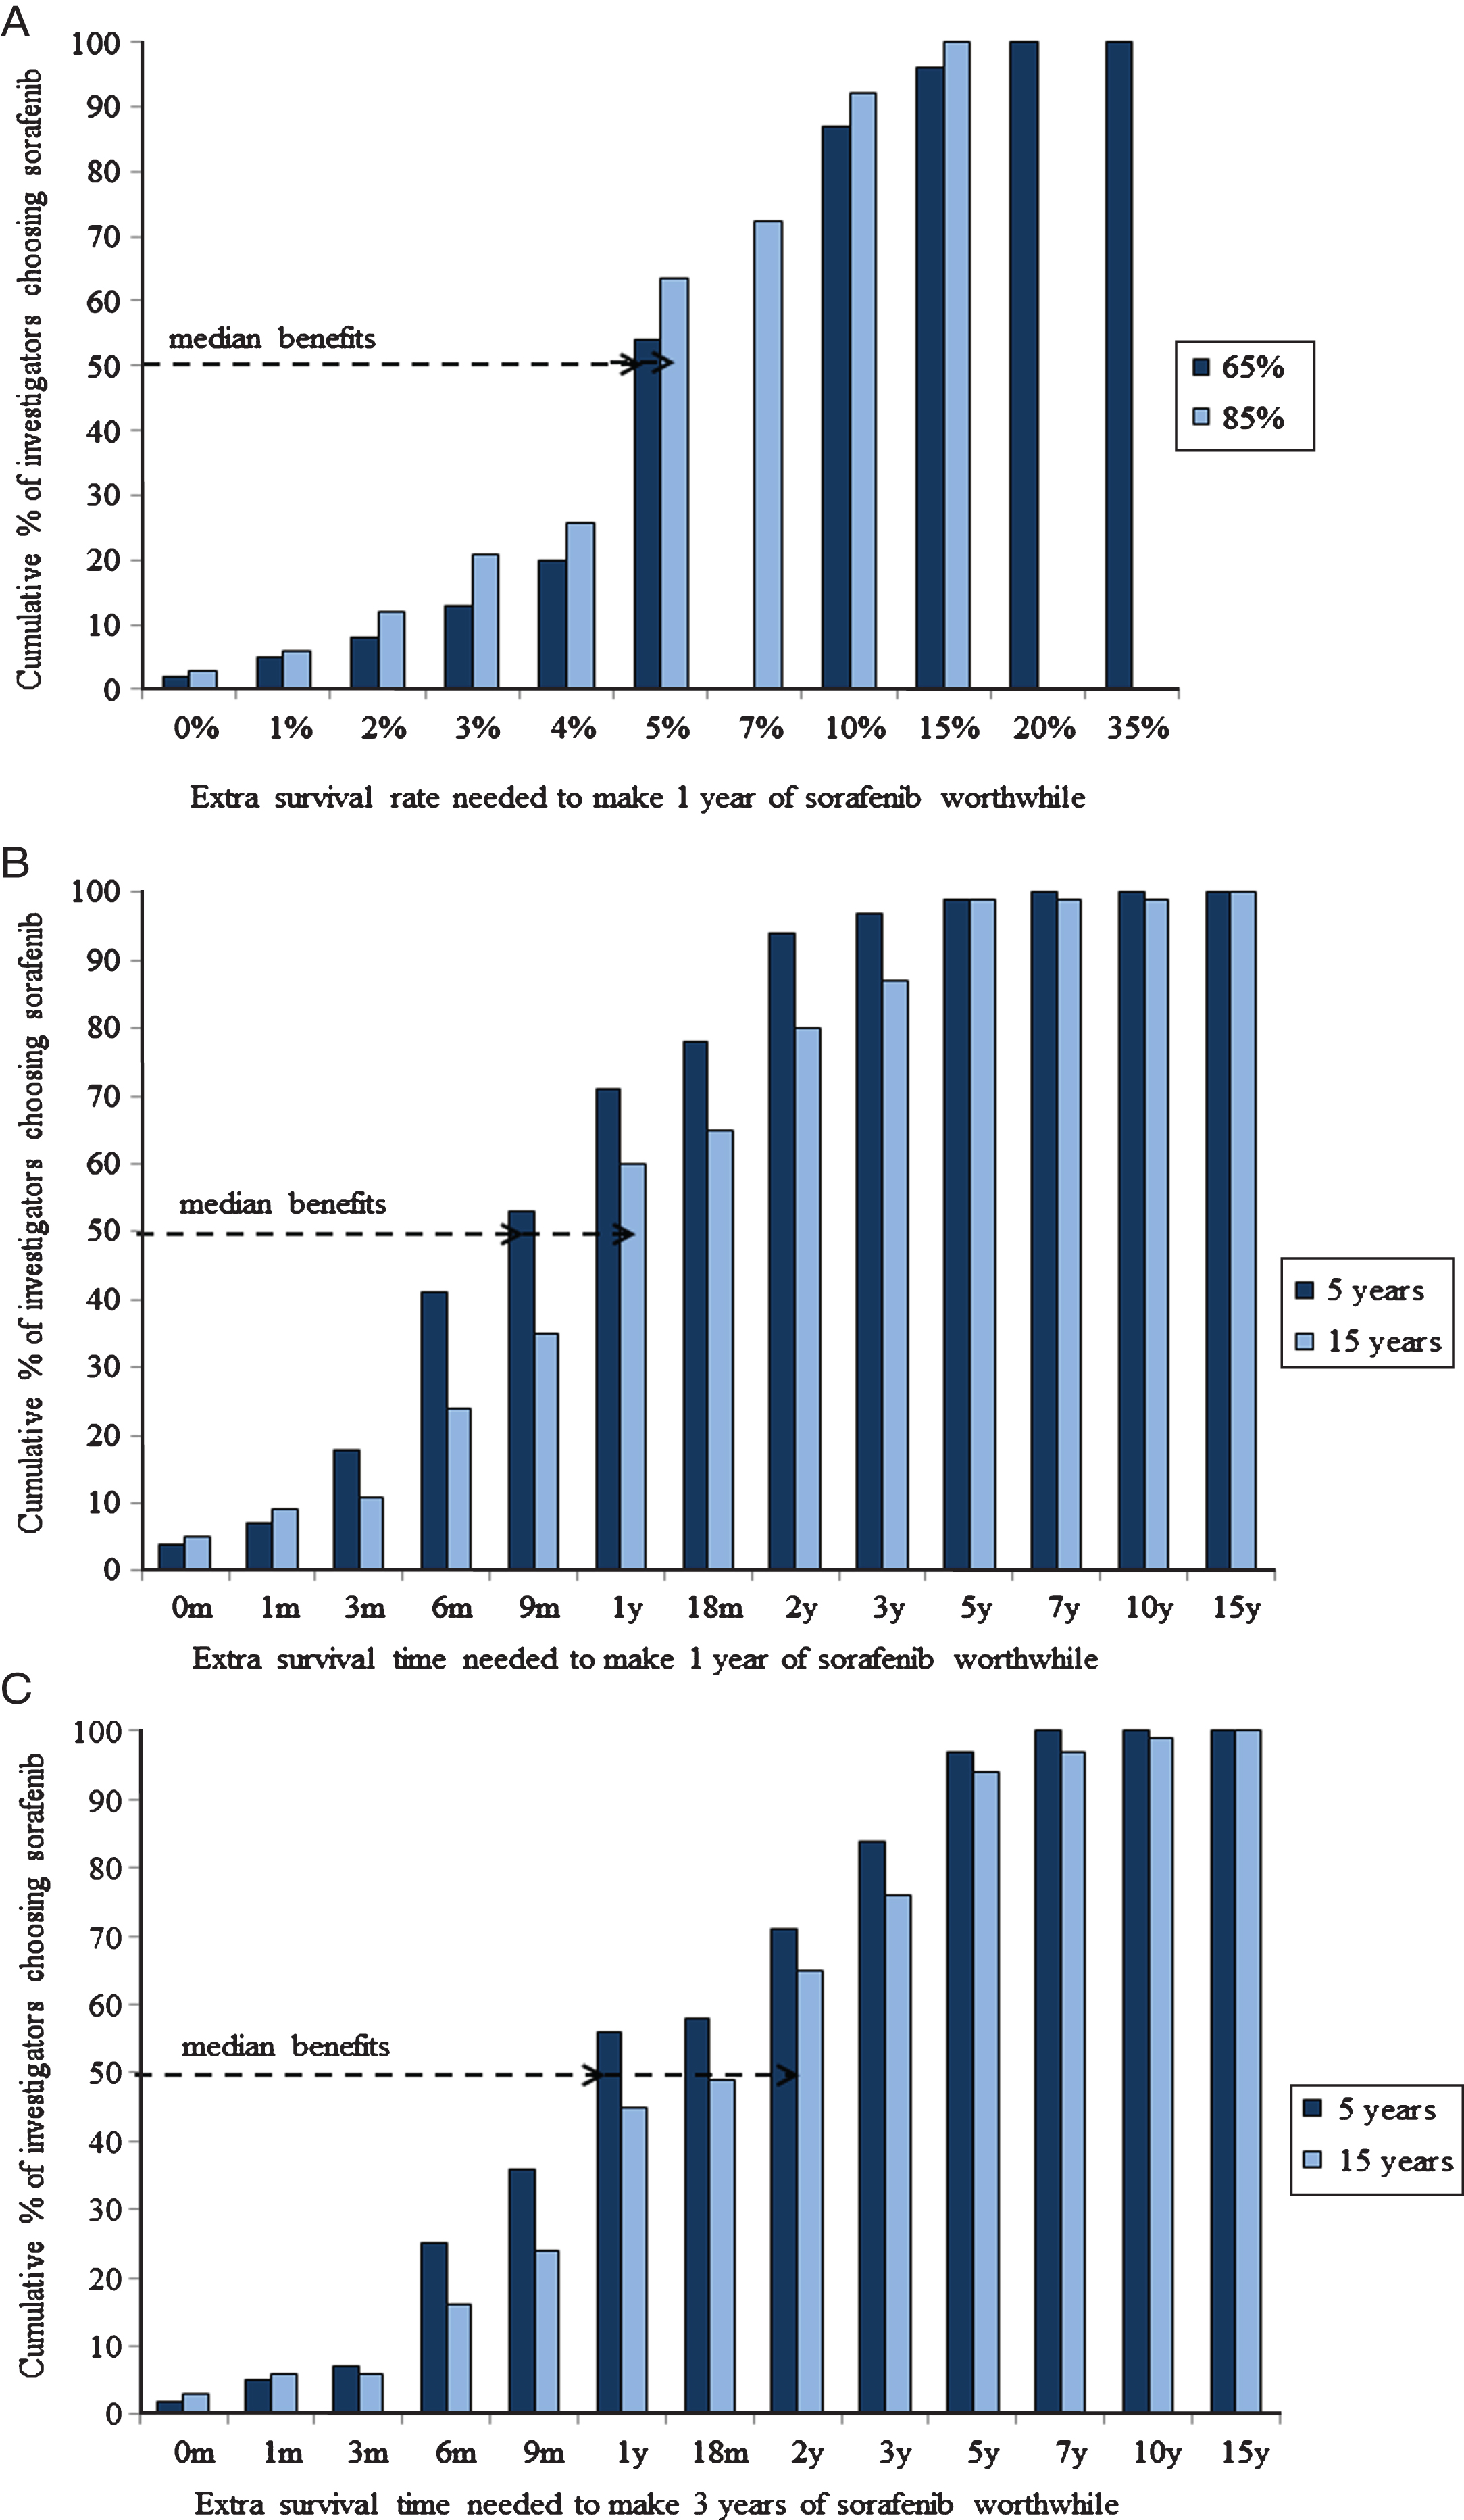 Cumulative proportions of SORCE investigators judging specified survival benefits sufficient to (A) warrant 1 year of adjuvant sorafenib given baseline survival rates at 5-years without adjuvant sorafenib of either 65% or 85% (B) warrant 1 year of adjuvant sorafenib given baseline survival times without adjuvant sorafenib of either 5 years or 15 years and (C) warrant 3 years of adjuvant sorafenib given baseline survival times with 1 year of adjuvant sorafenib of either 5 years or 15 years.